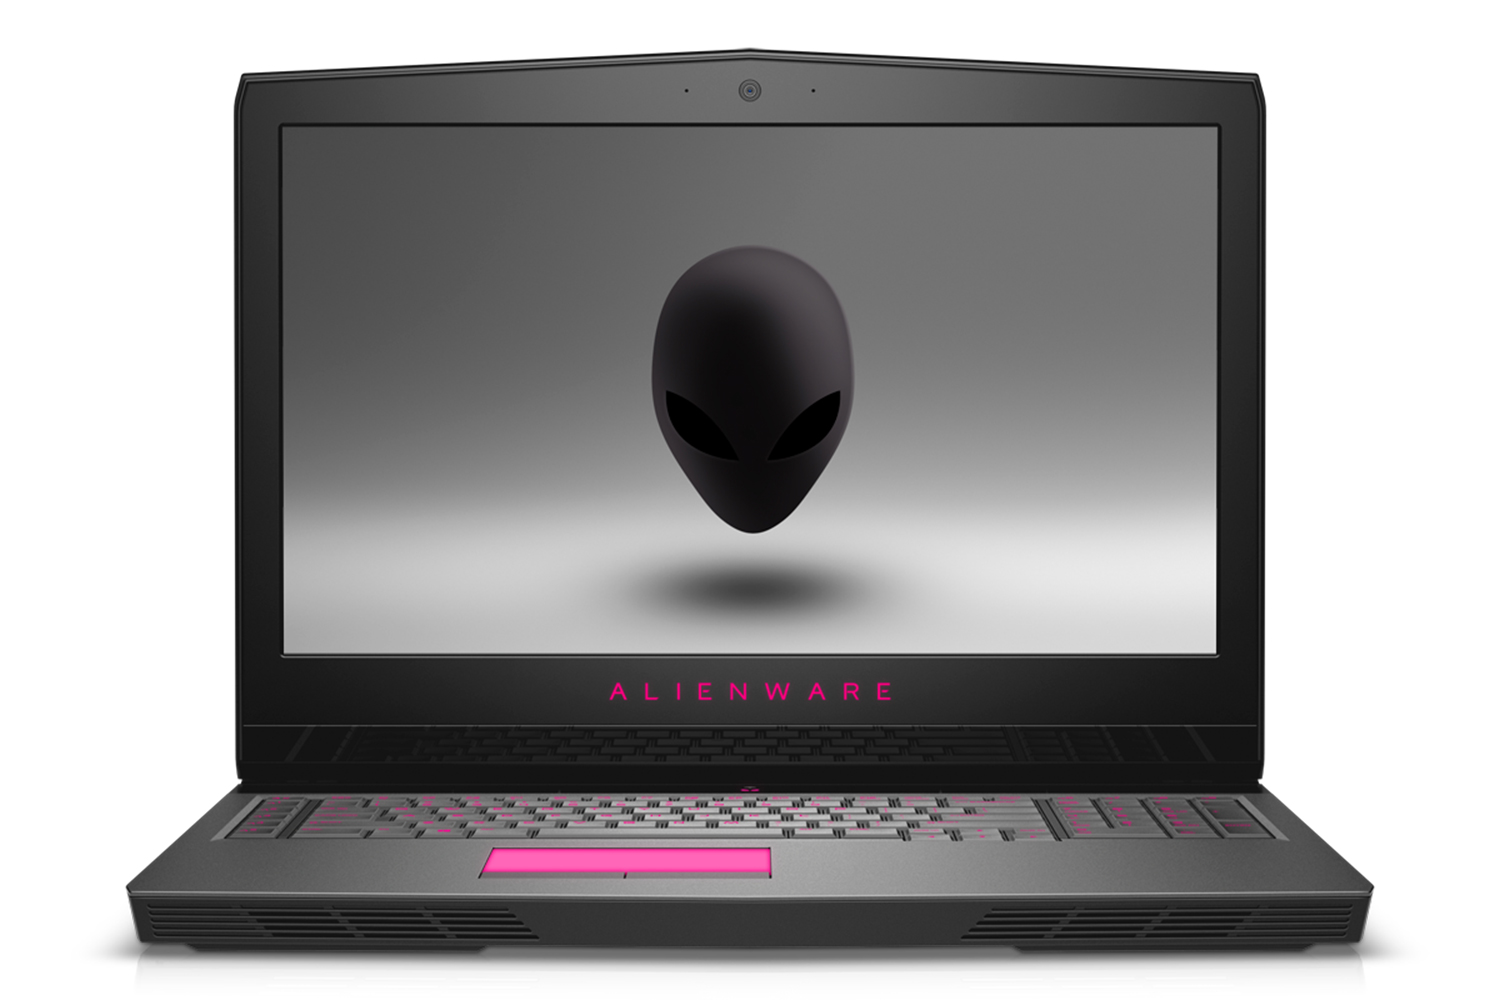 dell alienware inspiron 7000 gaming laptops refresh intel seventh gen cpu aw 17 09